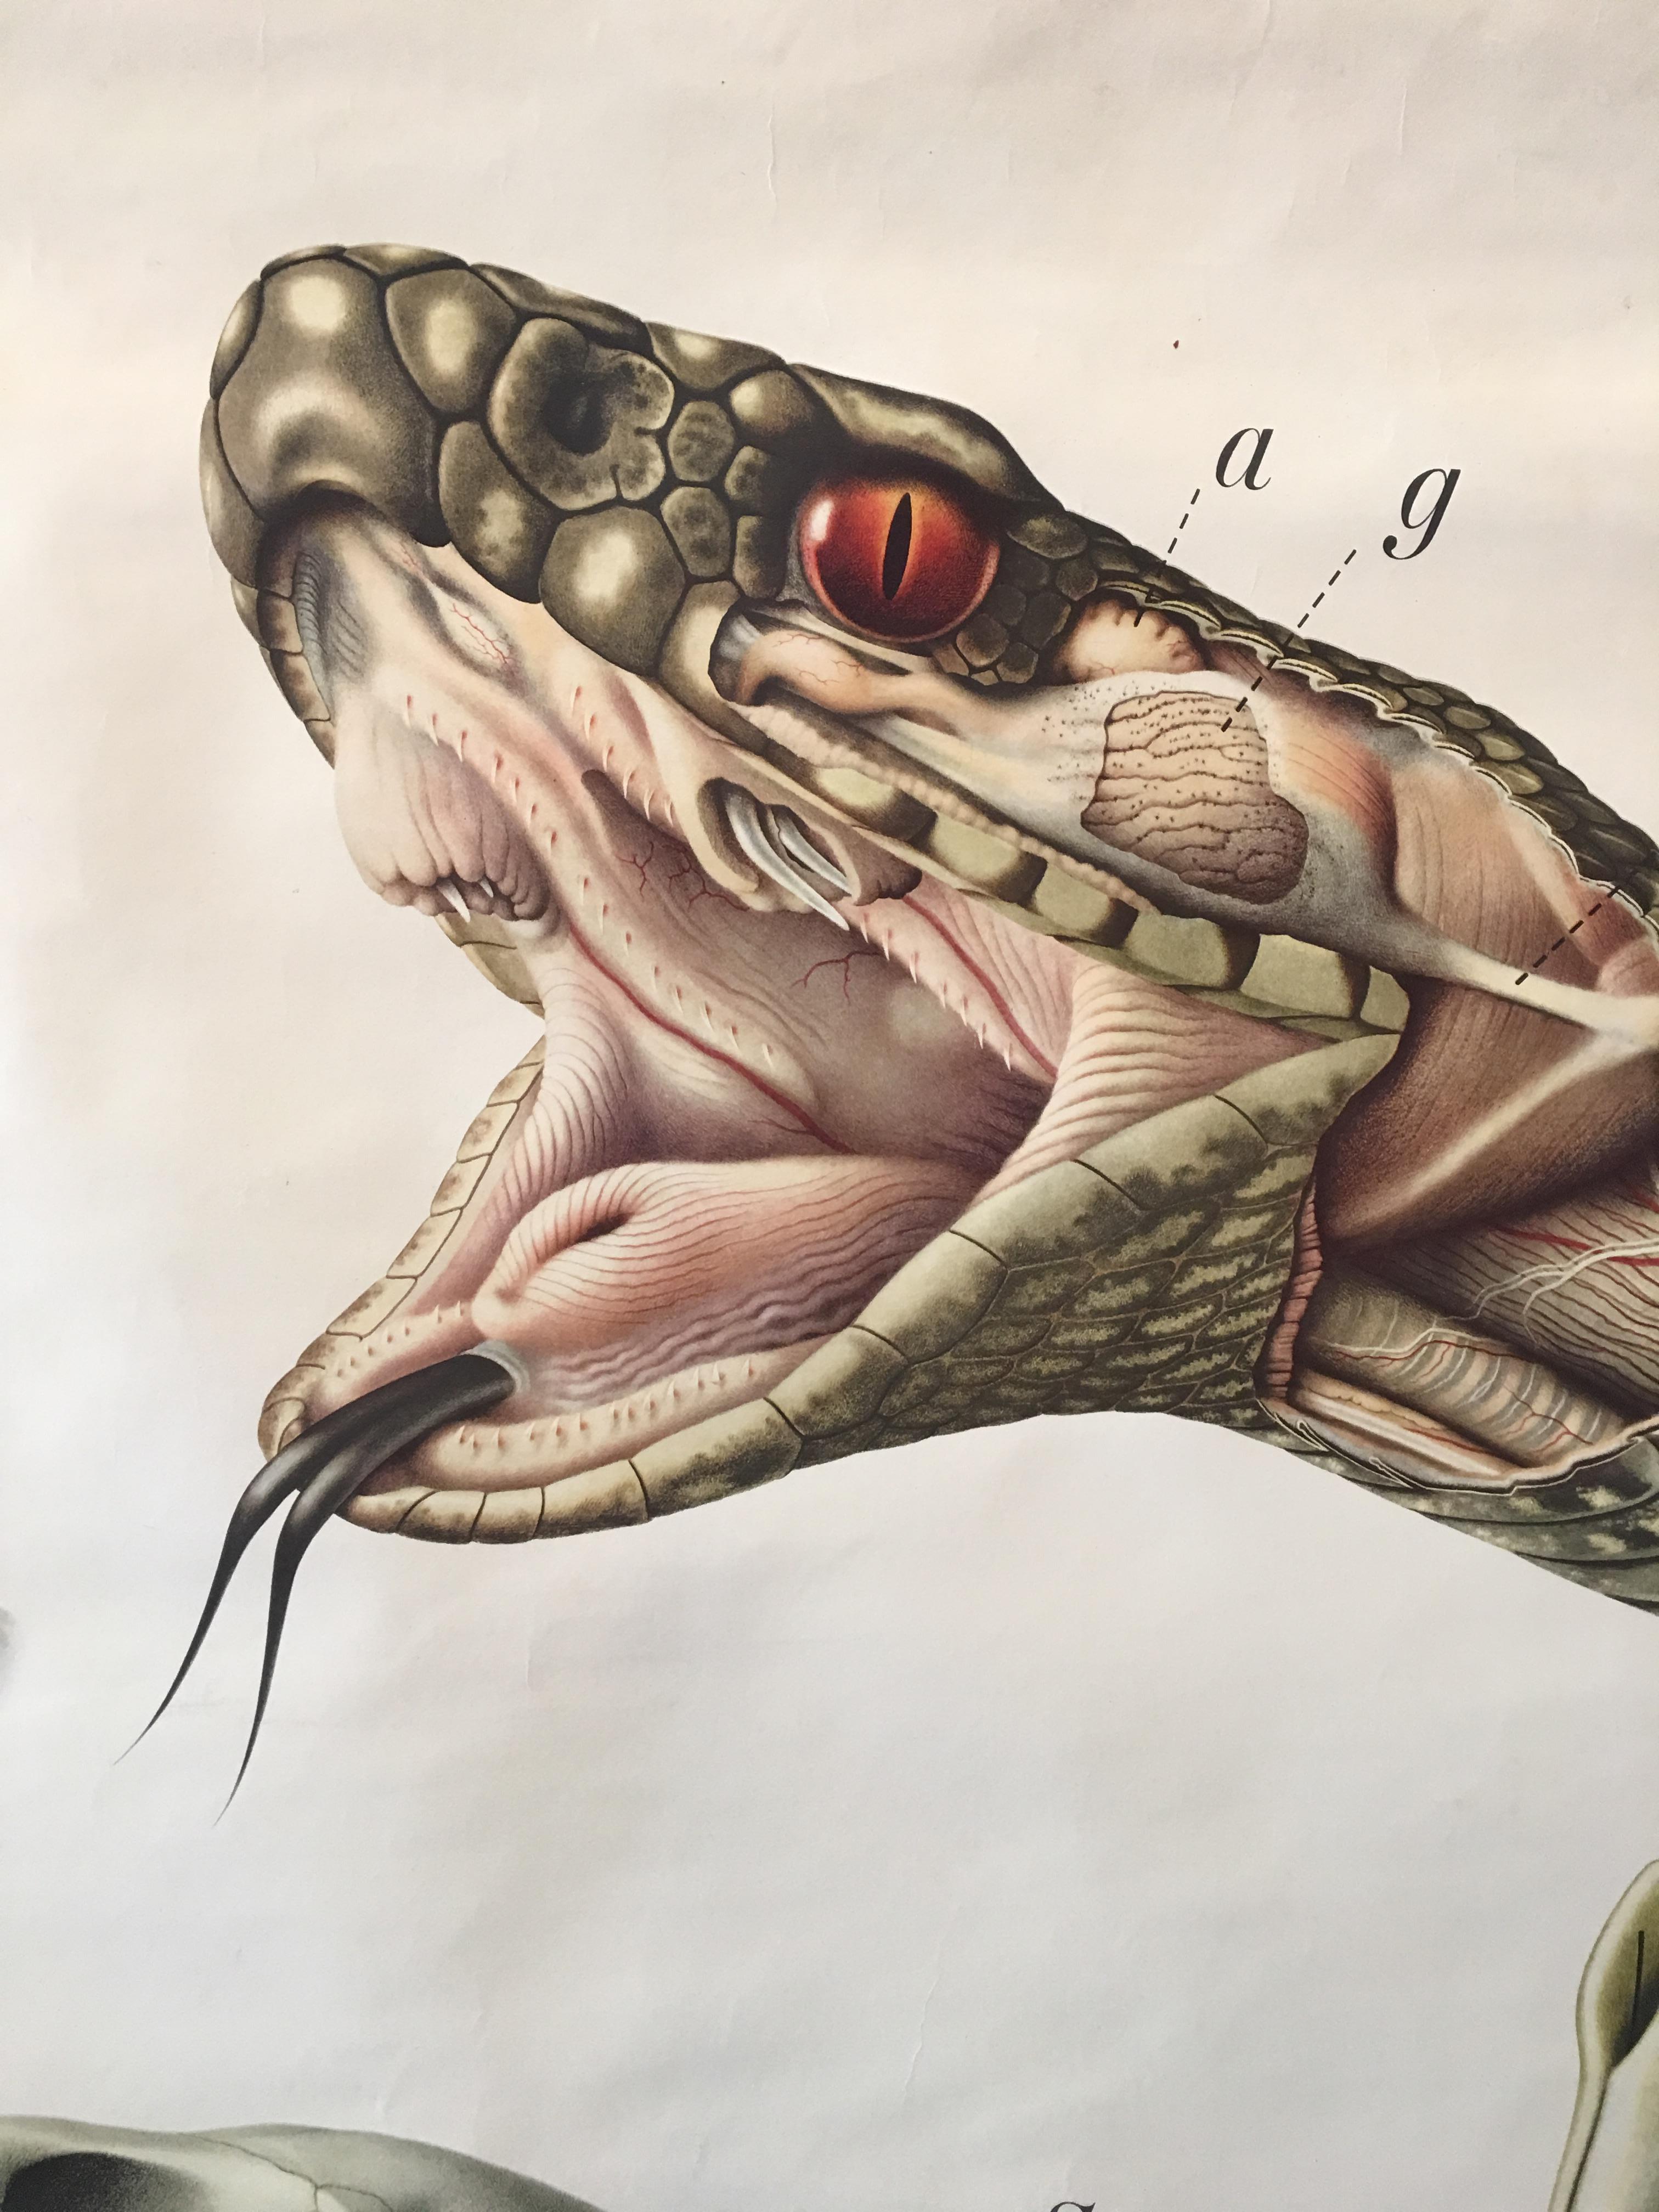 Original vintage scientific chart of a snake head with jaw-bone and fang detail 

Dimensions: 127 cm x 95 cm (50 x 37 inches)

This scientific chart is an original paper scroll with fine detail depicting the inner working of a snake (Vipera